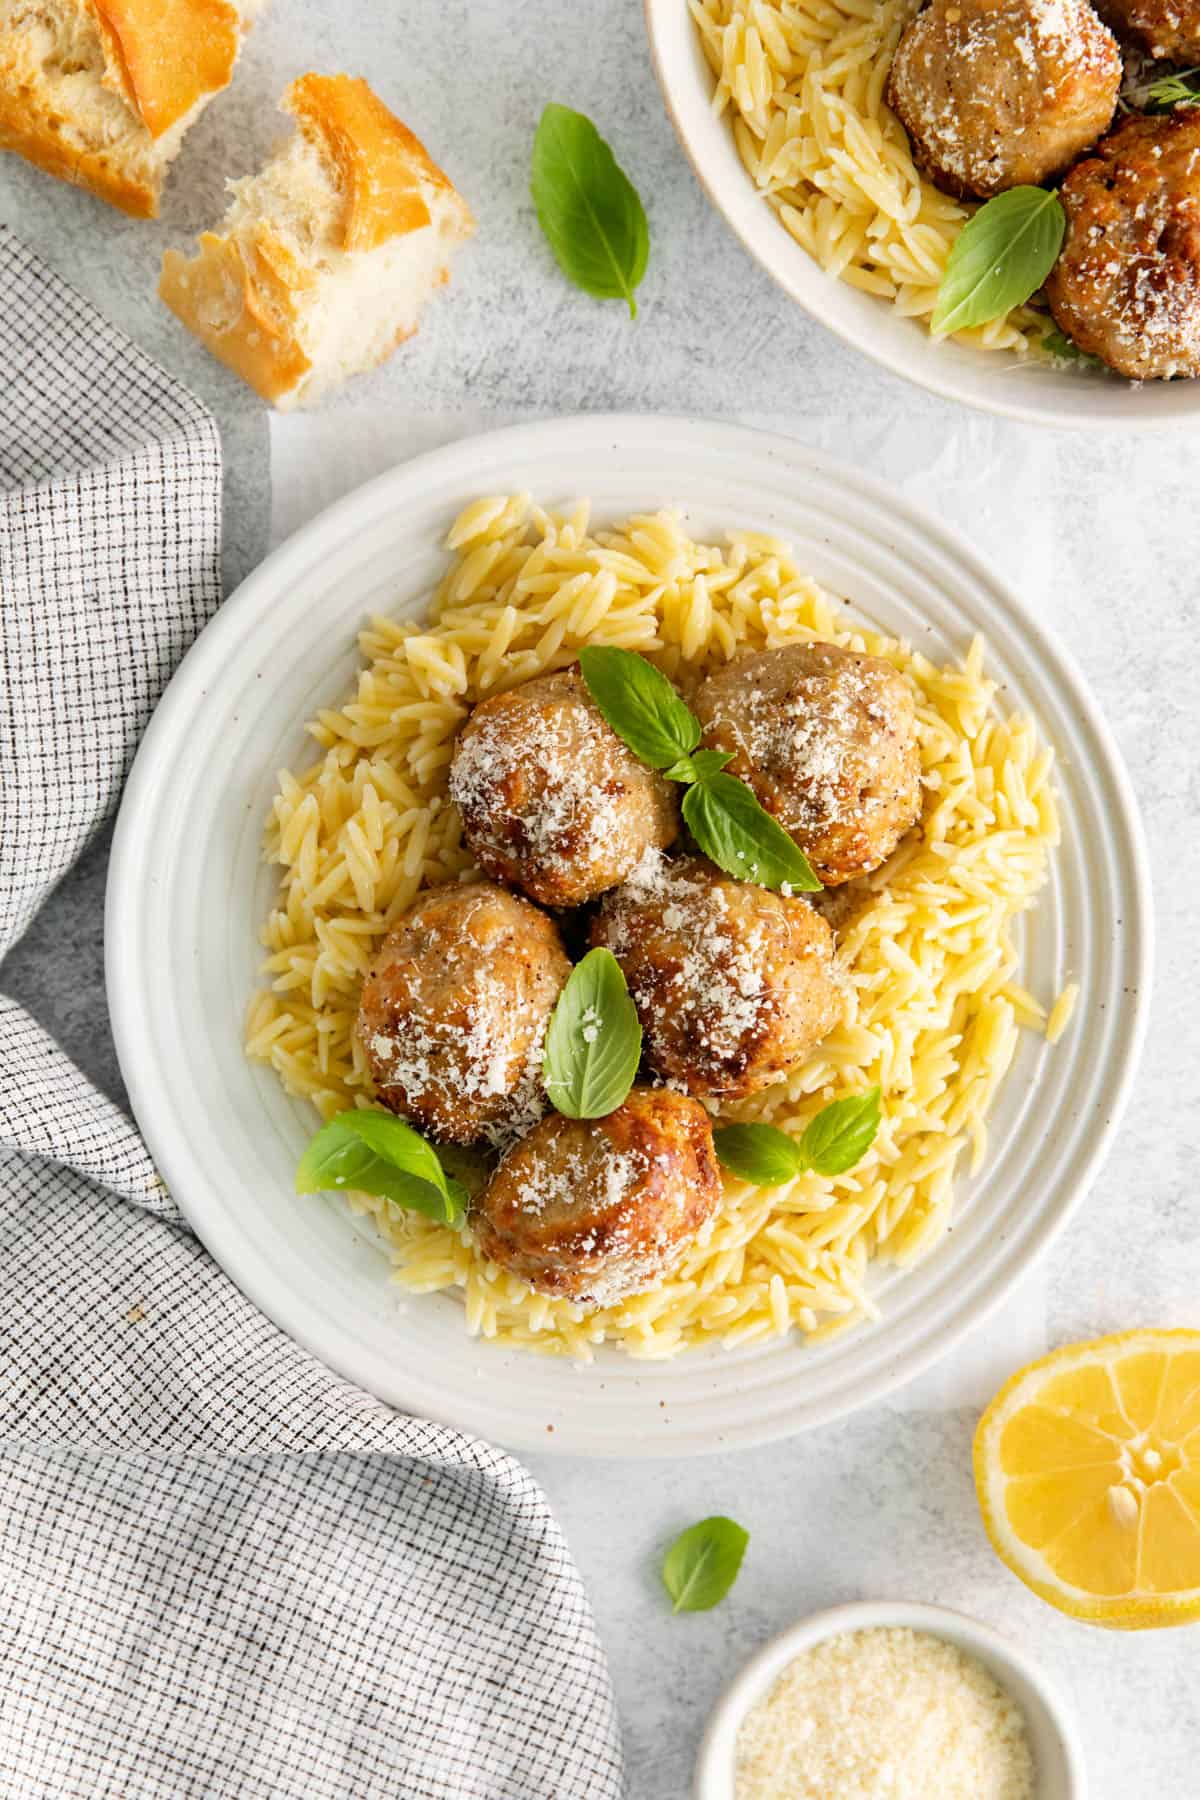 Five air fryer lemon chicken meatballs on a plate with pasta.